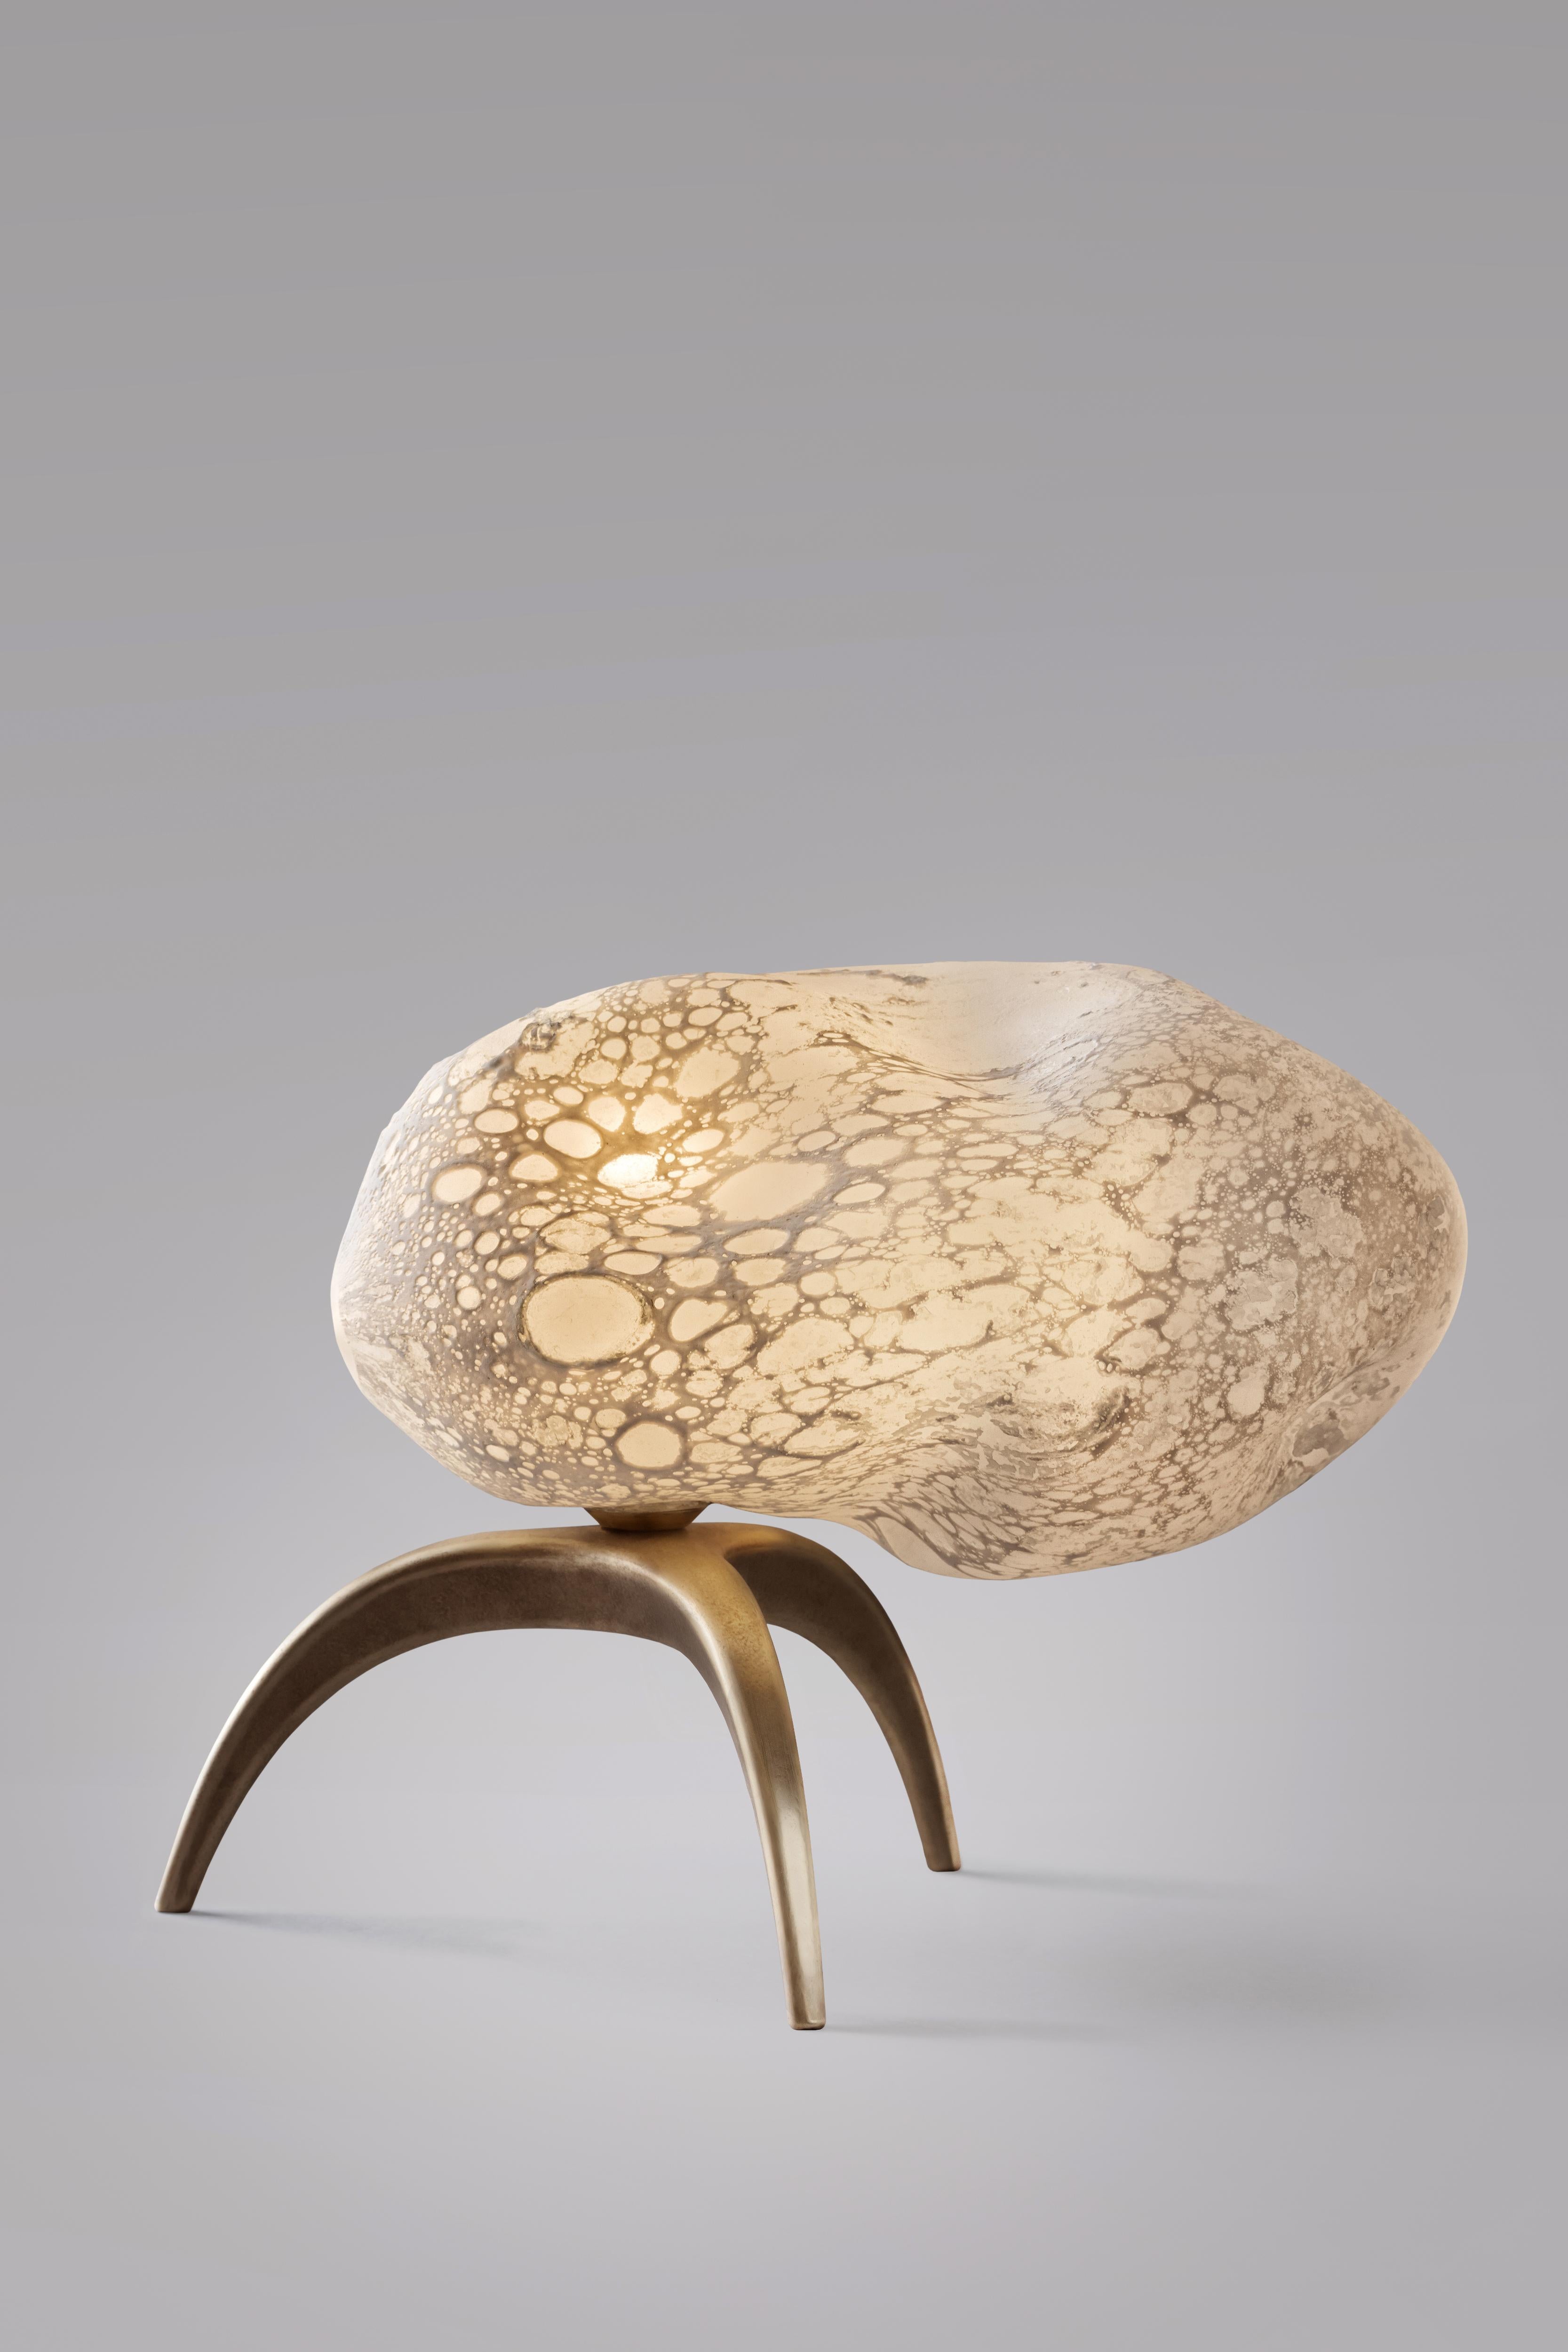 Meteore sculpted table lamp - Ludovic Clément d’Armont.
Material: blown glass and brass.
Dimensions: 20 x 25 x 15 cm.

Ludovic Clément d’Armont is in the continuation of a family tradition of centuries of gentle glassmakers, painters, carpenters